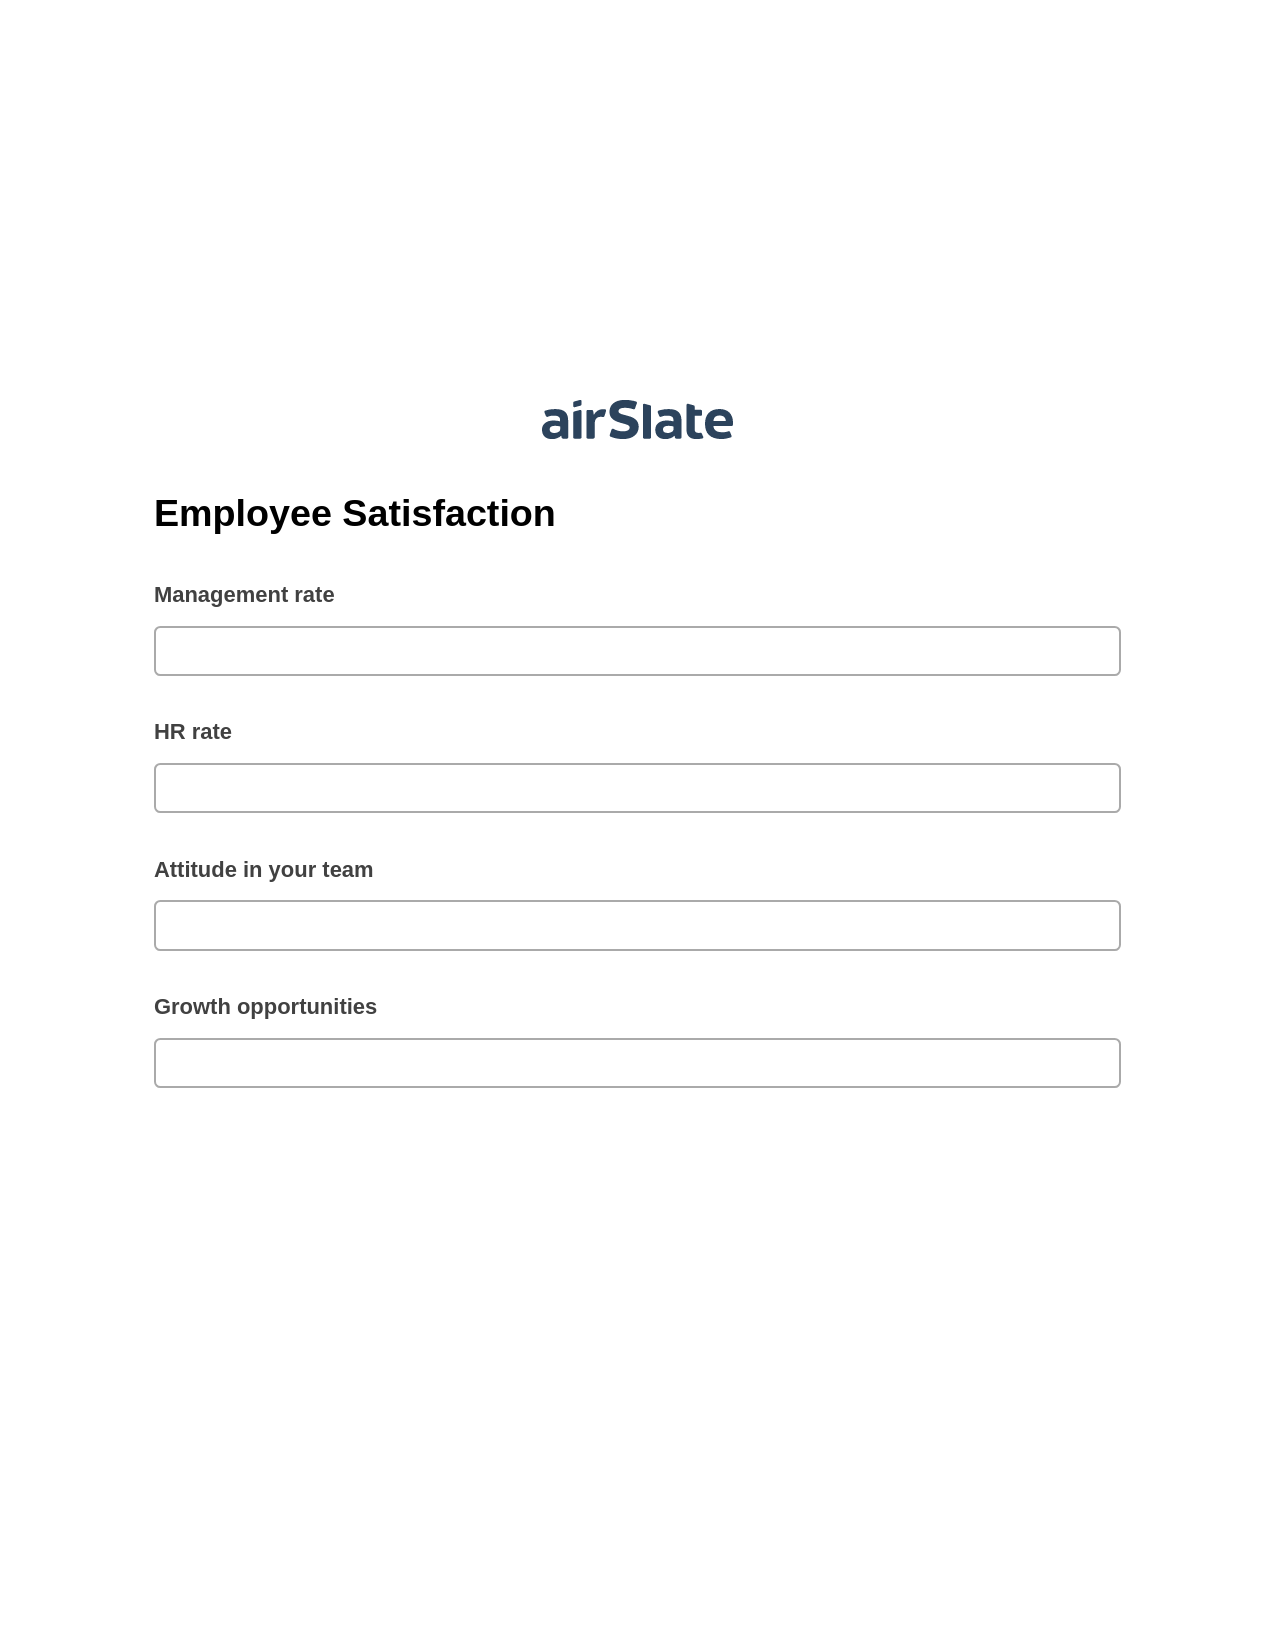 Employee Satisfaction Pre-fill from Litmos bot, Lock the slate bot, Archive to SharePoint Folder Bot